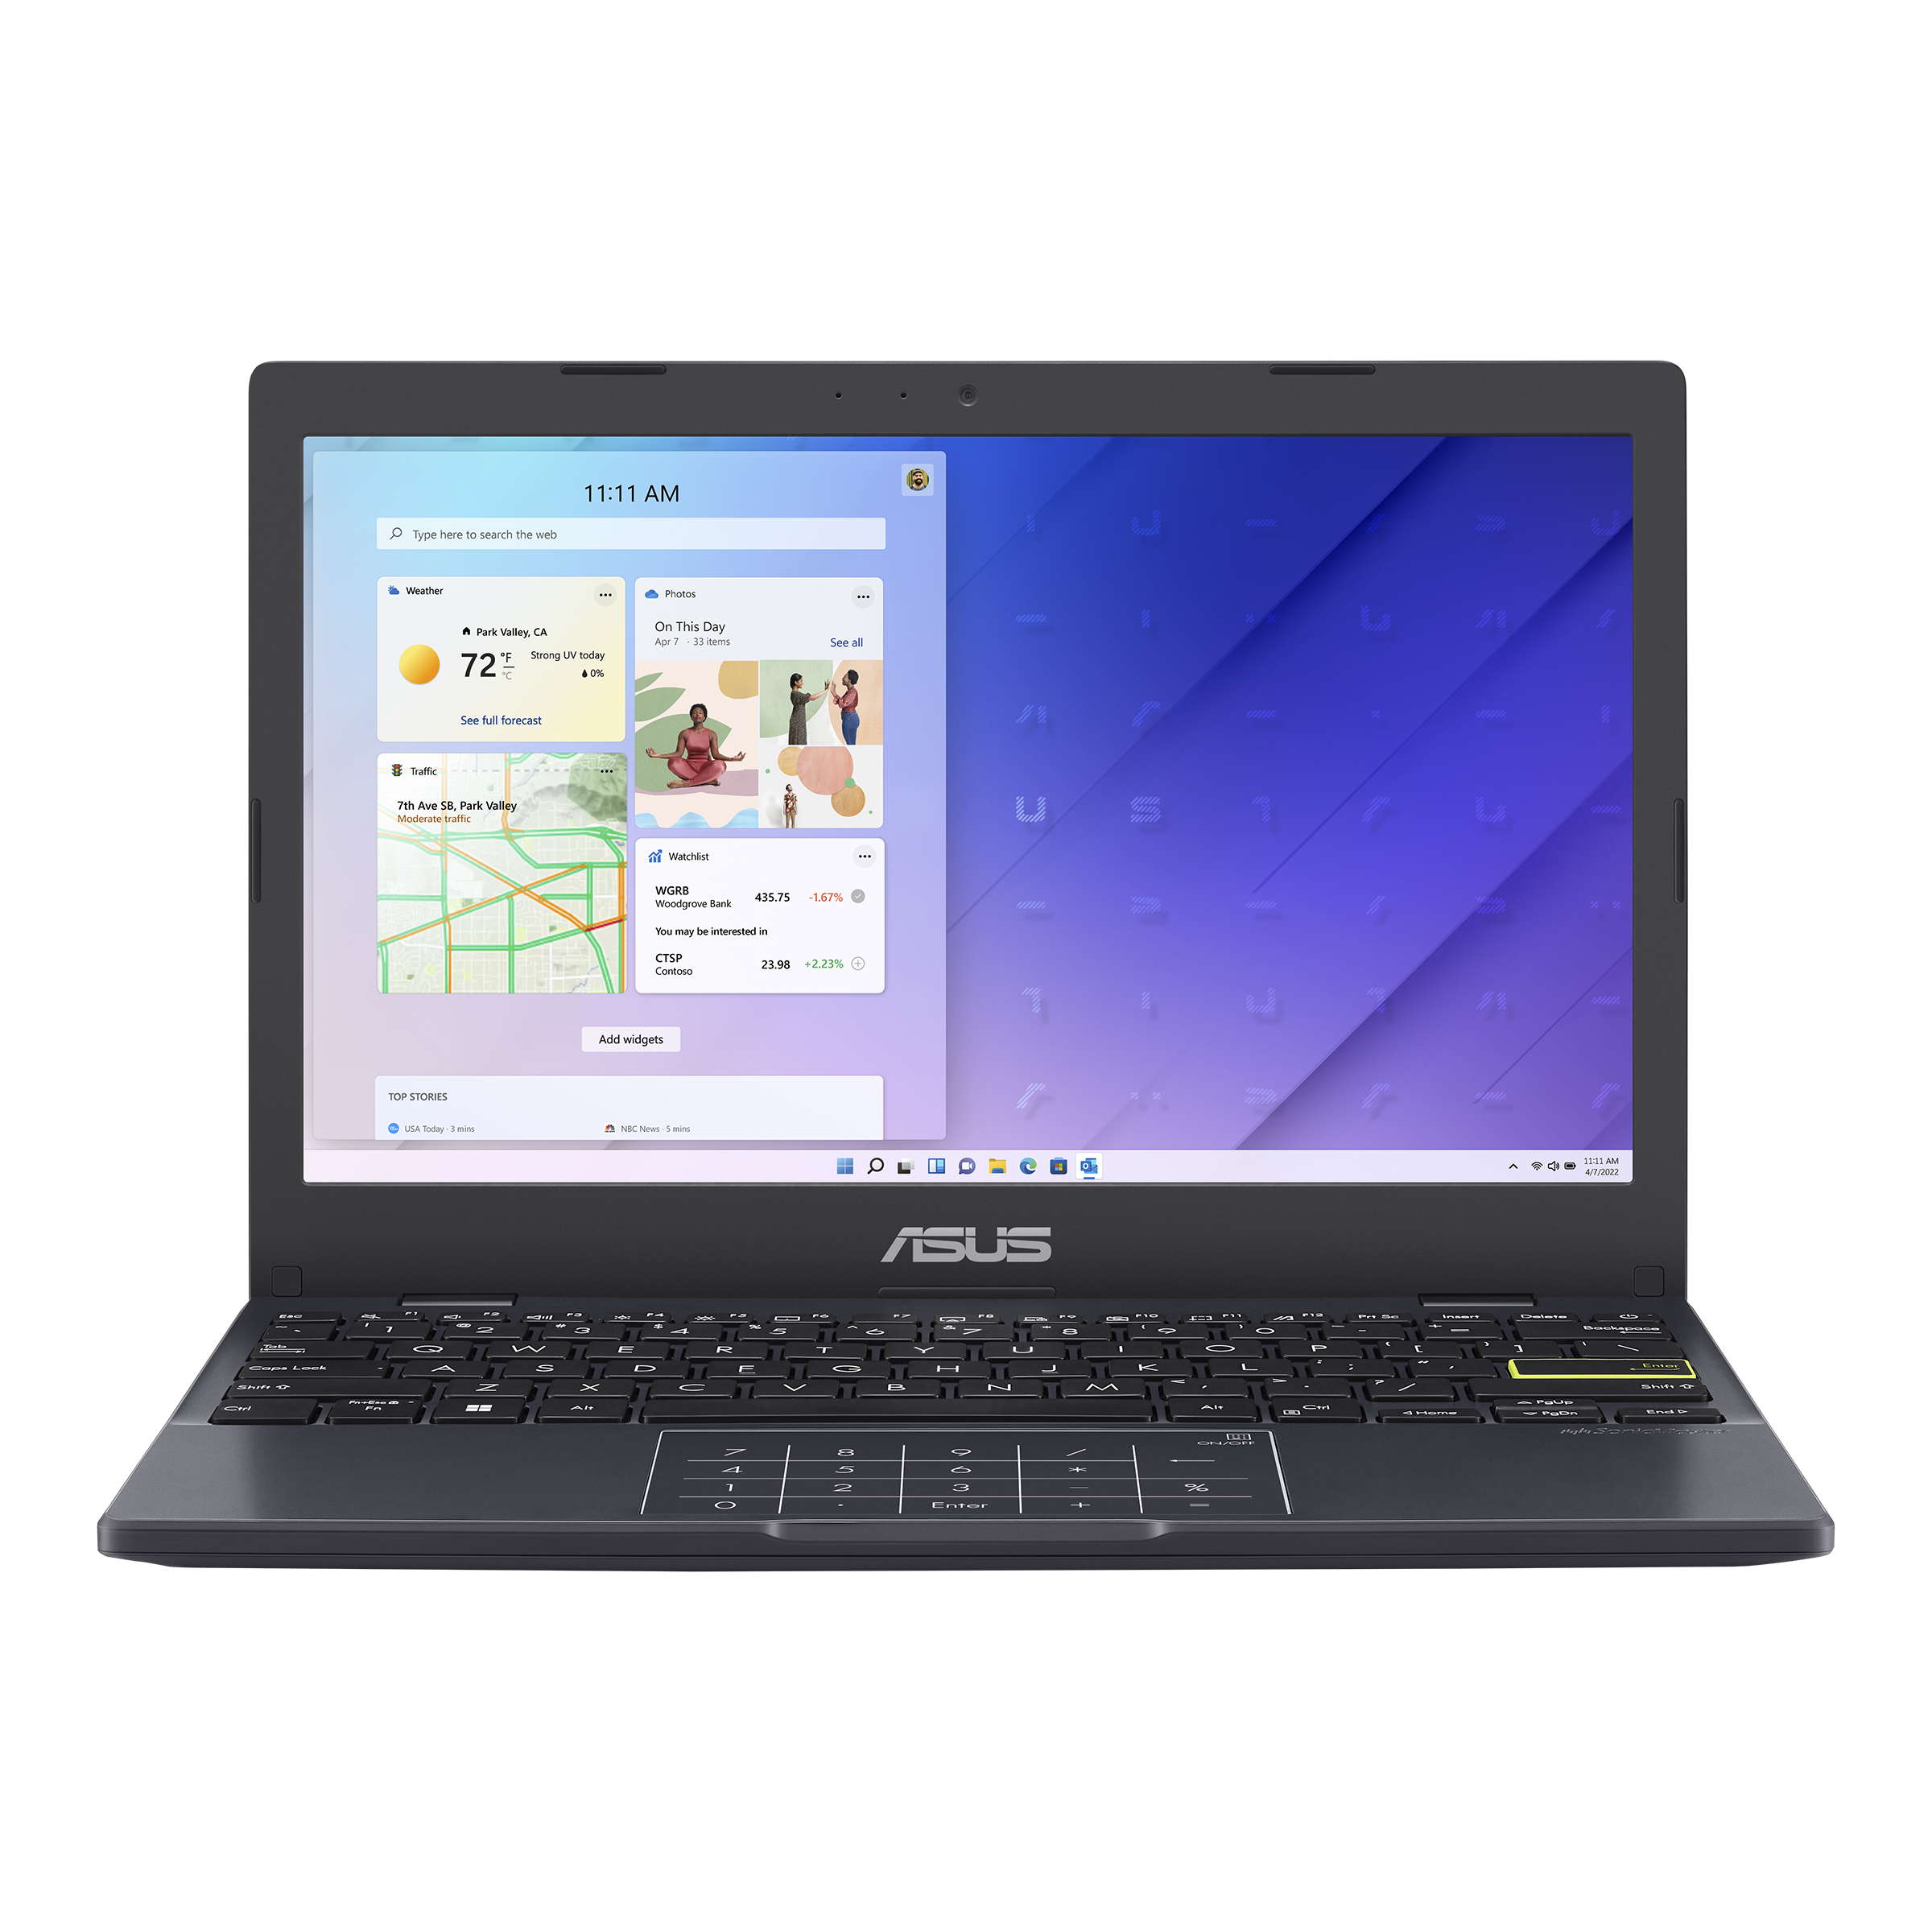 ASUS E210｜Laptop For Home｜ASUS Indonesia